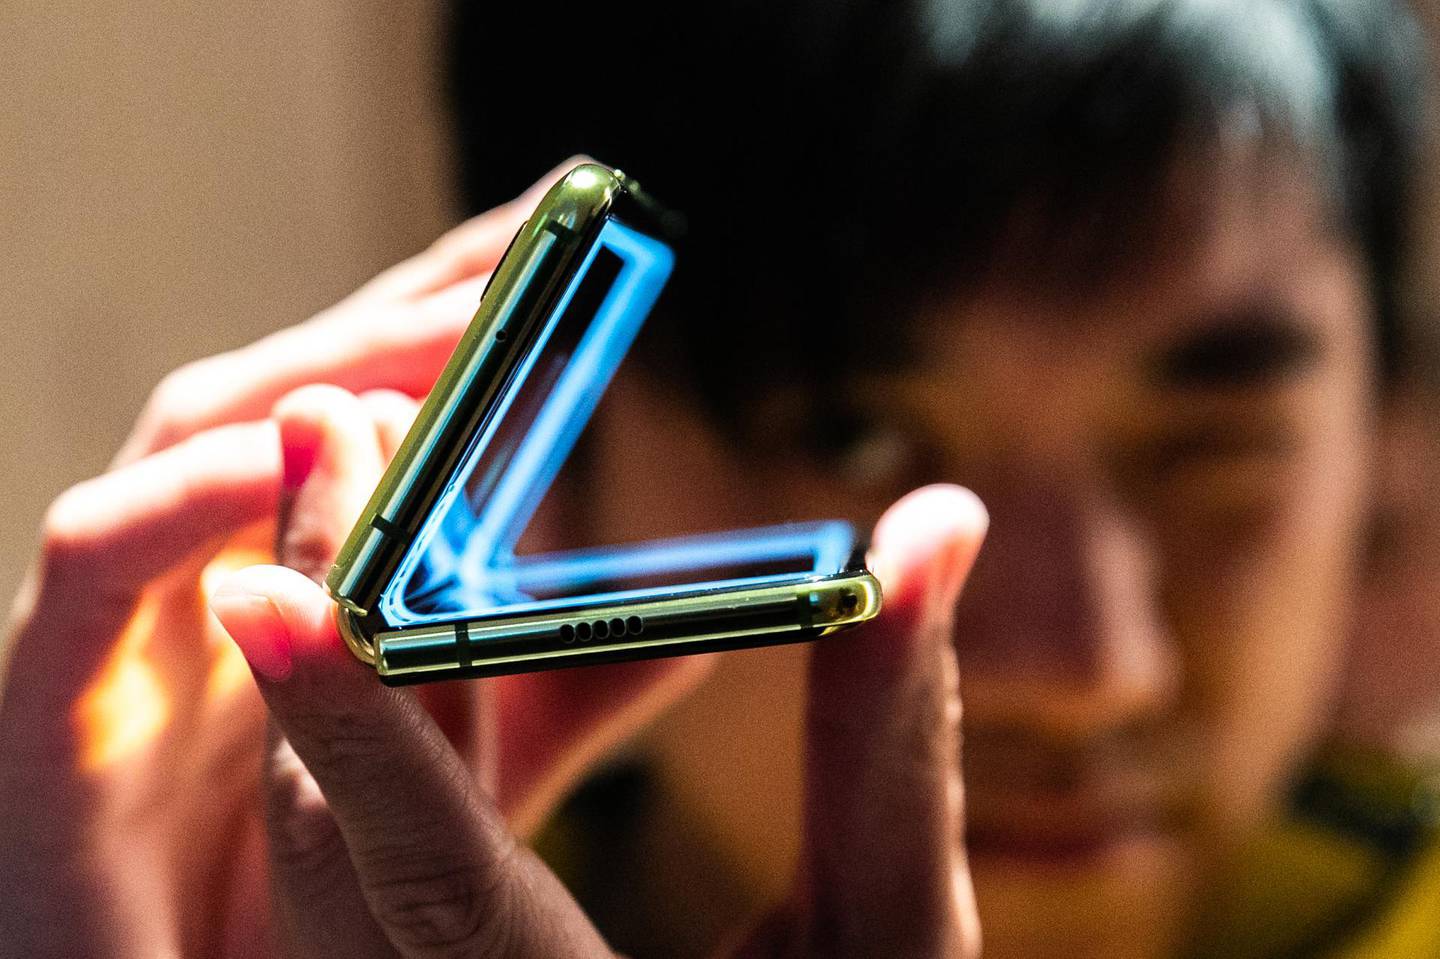 An attendee holds a Samsung Electronics Co. Galaxy Fold mobile device during an unveiling event in New York, U.S., on Monday, April 15, 2019. Samsung announced the phone in February and it goes on sale April 26 at the wallet-stretching price of $1,980. Photographer: Jeenah Moon/Bloomberg